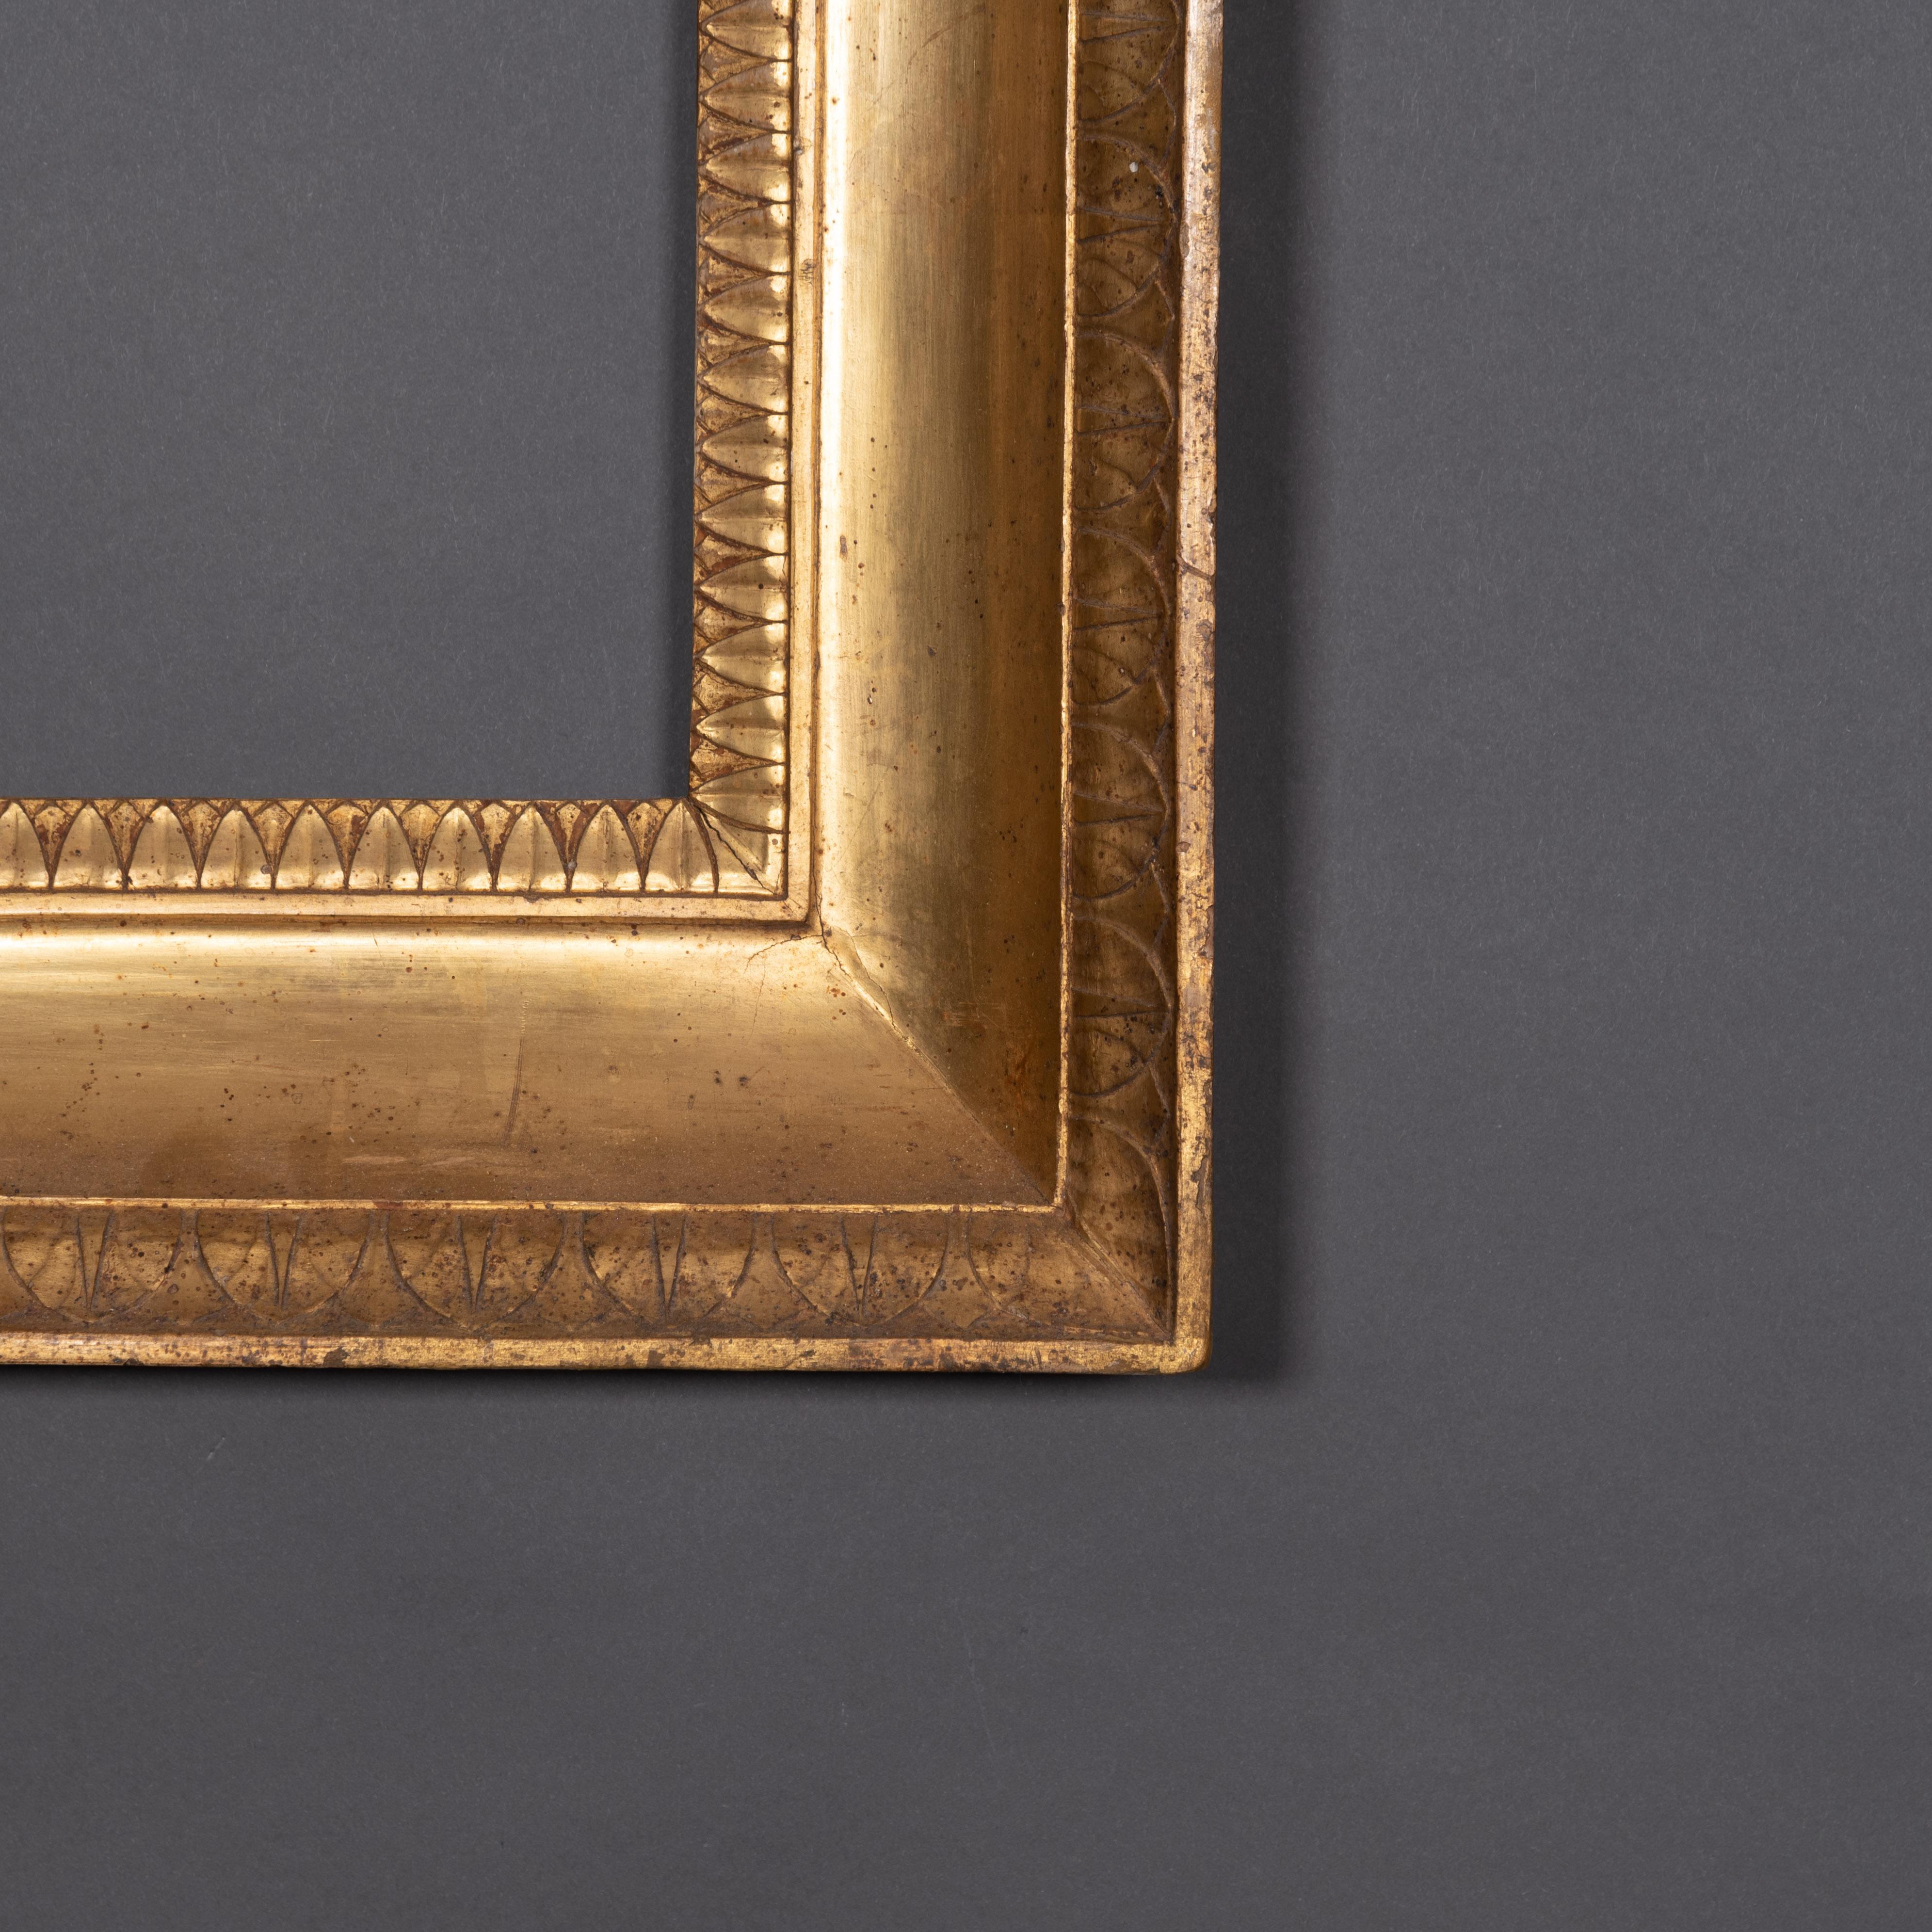 Wonderful Italian Empire original giltwood frame with two rows of carving
Early 19th century 
Internal measurements cm 58.5 x 47

Every item of our Gallery, upon request, is accompanied by a certificate of authenticity issued by Sabrina Egidi